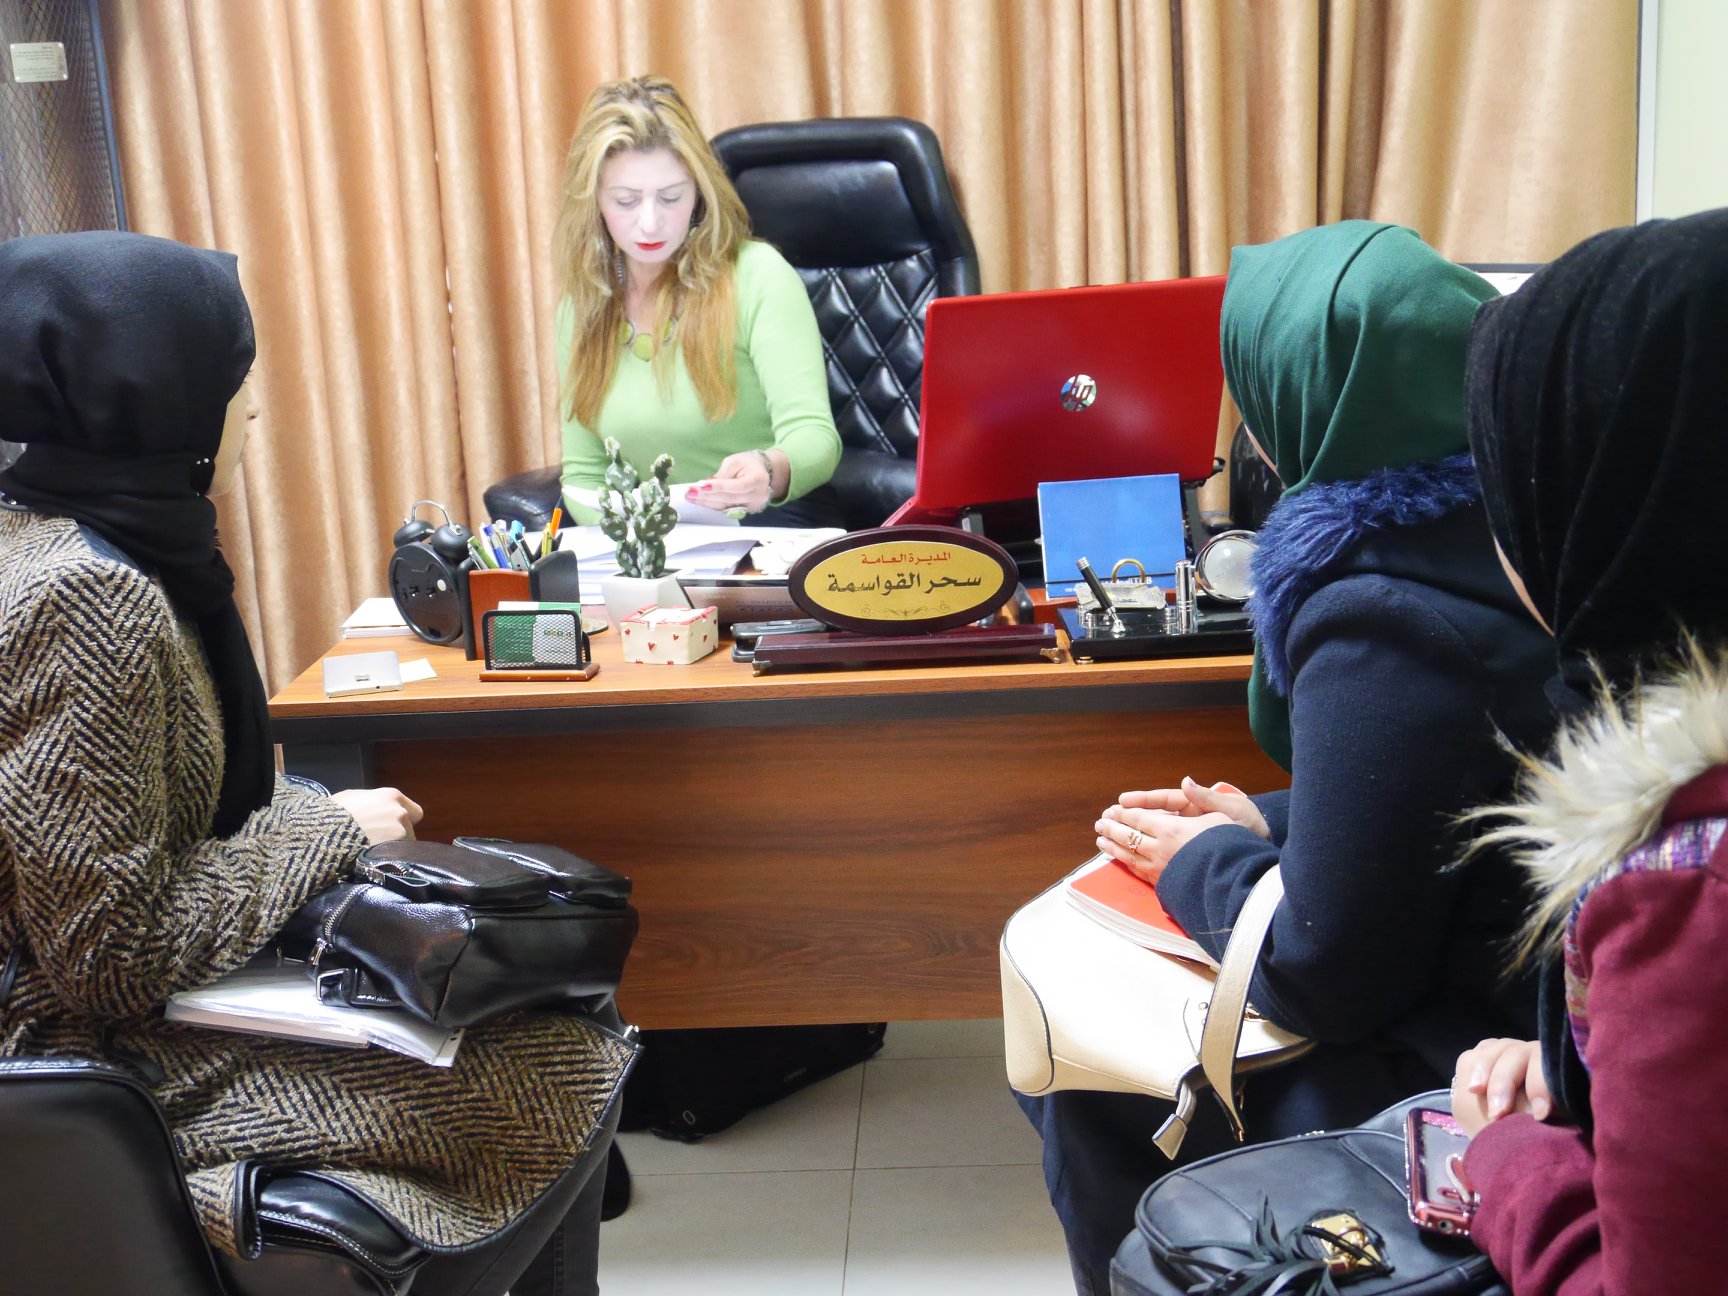  The general director of Roles for Social Change Association-ADWAR, Sahar Alkawasmeh, hosted Hebron University’s students in order to help students in preparing academic report on CEDAW